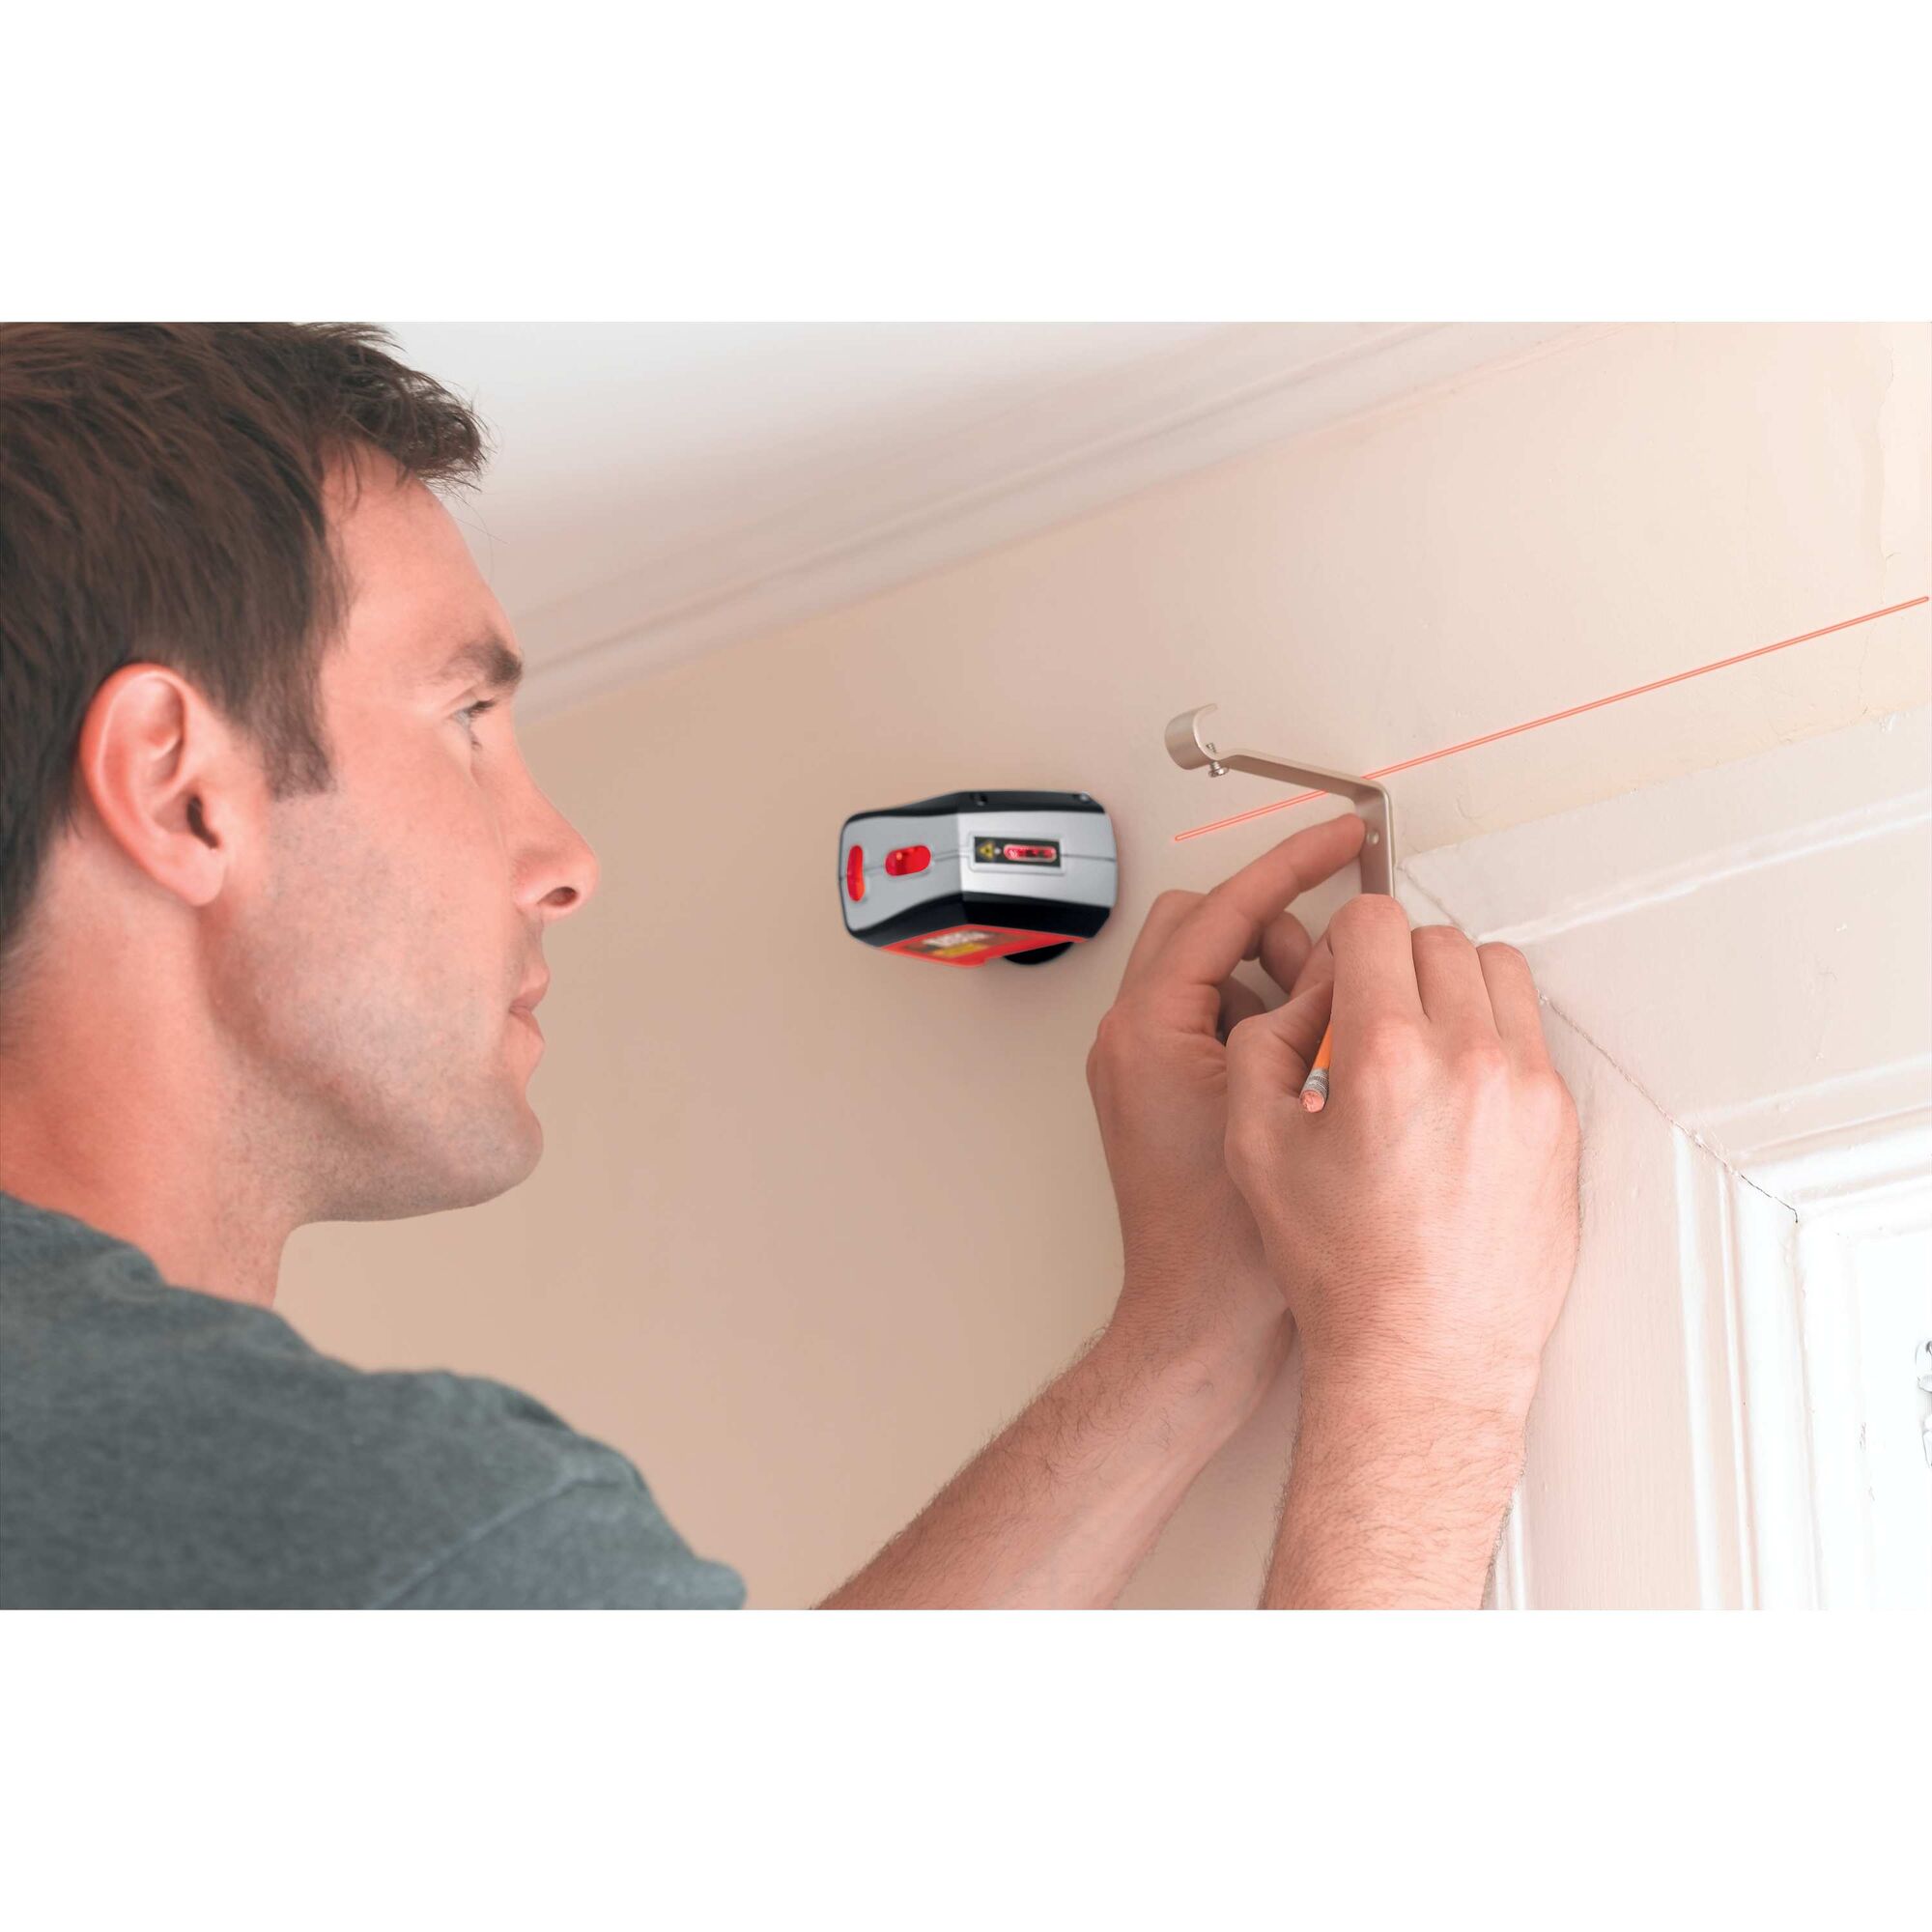 Laser level being used by a person to perfectly fix curtain rod attachment.